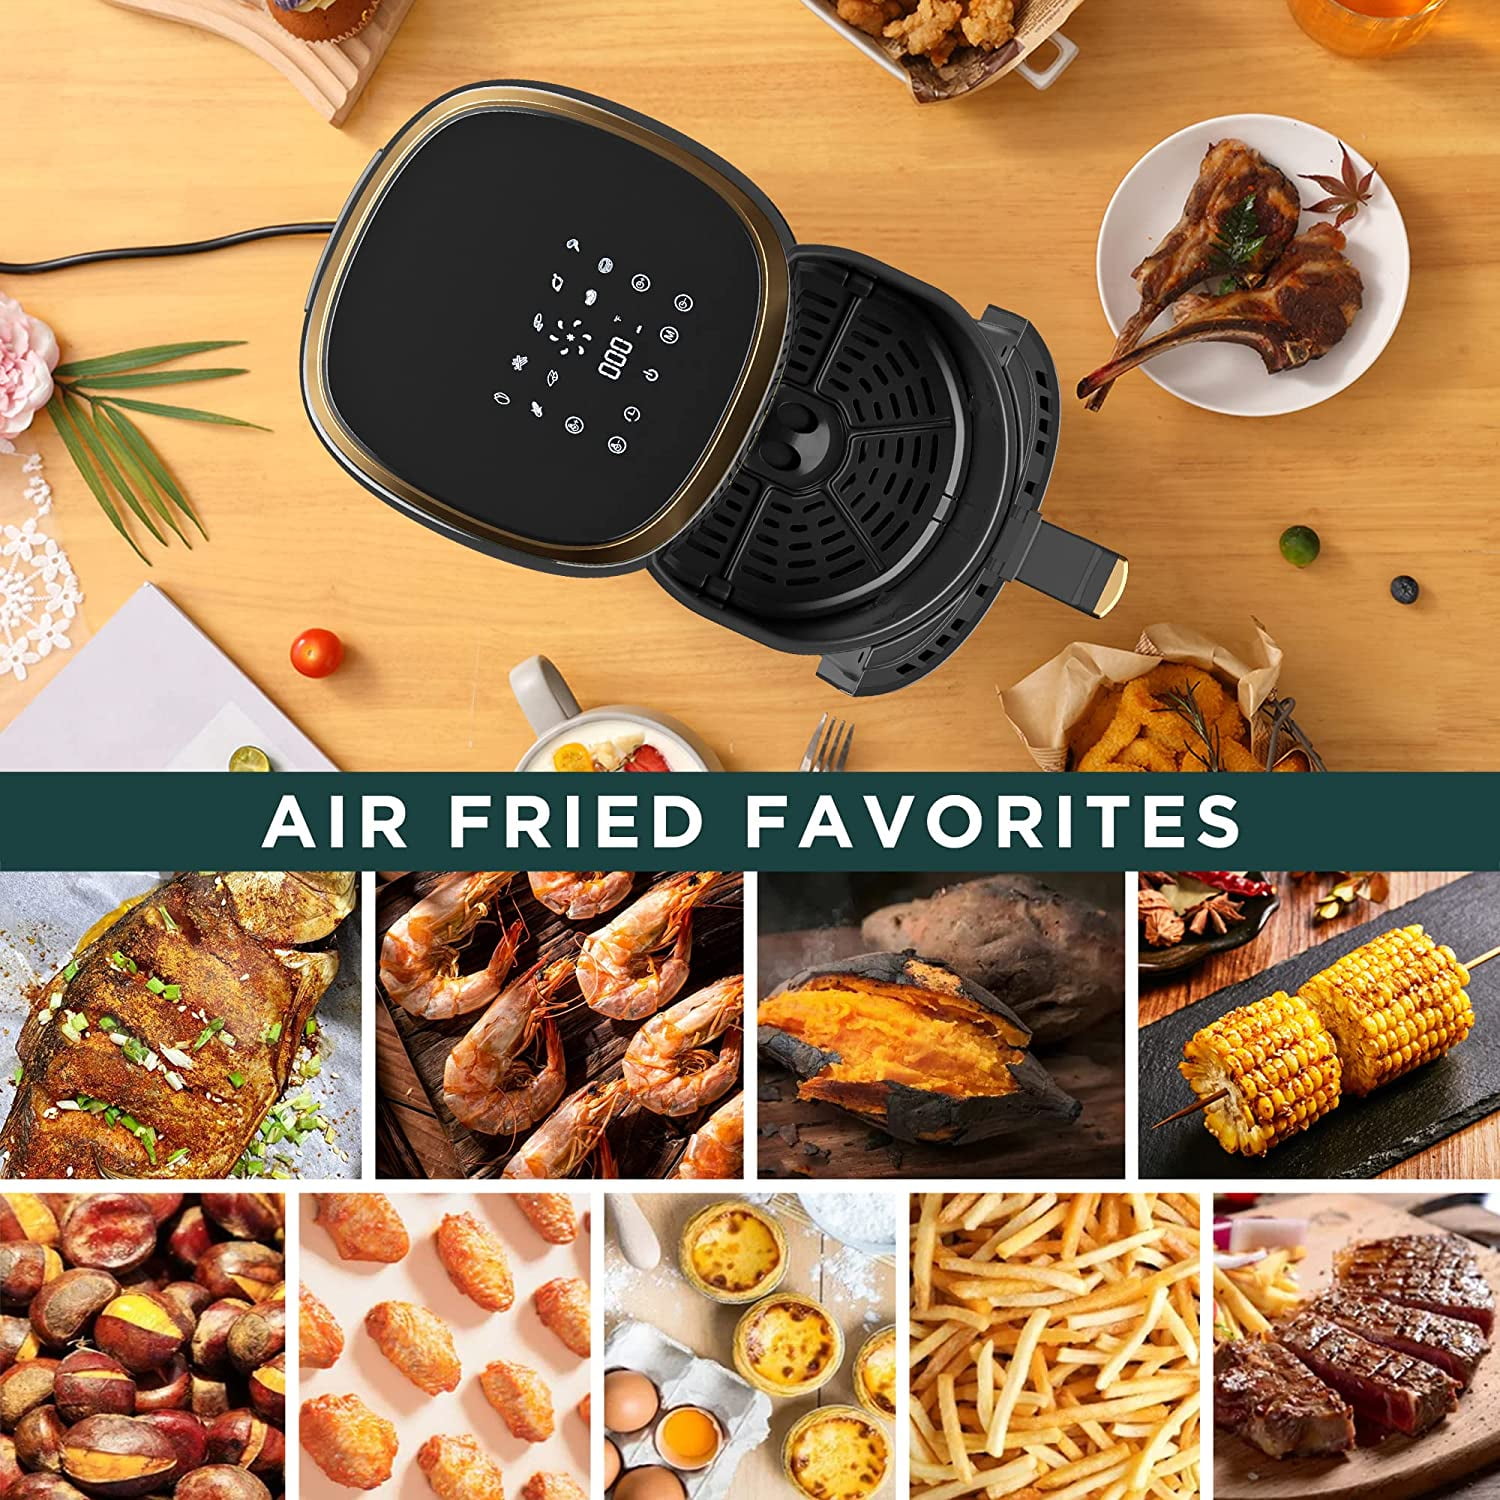 HAUSHOF Air Fryer, 4.2 Quart Compact Small Oven with 9 Cooking Functions, Nonstick Stainless Steel & Dishwasher-Safe, No-Oil Air Fry, Roast, Bake